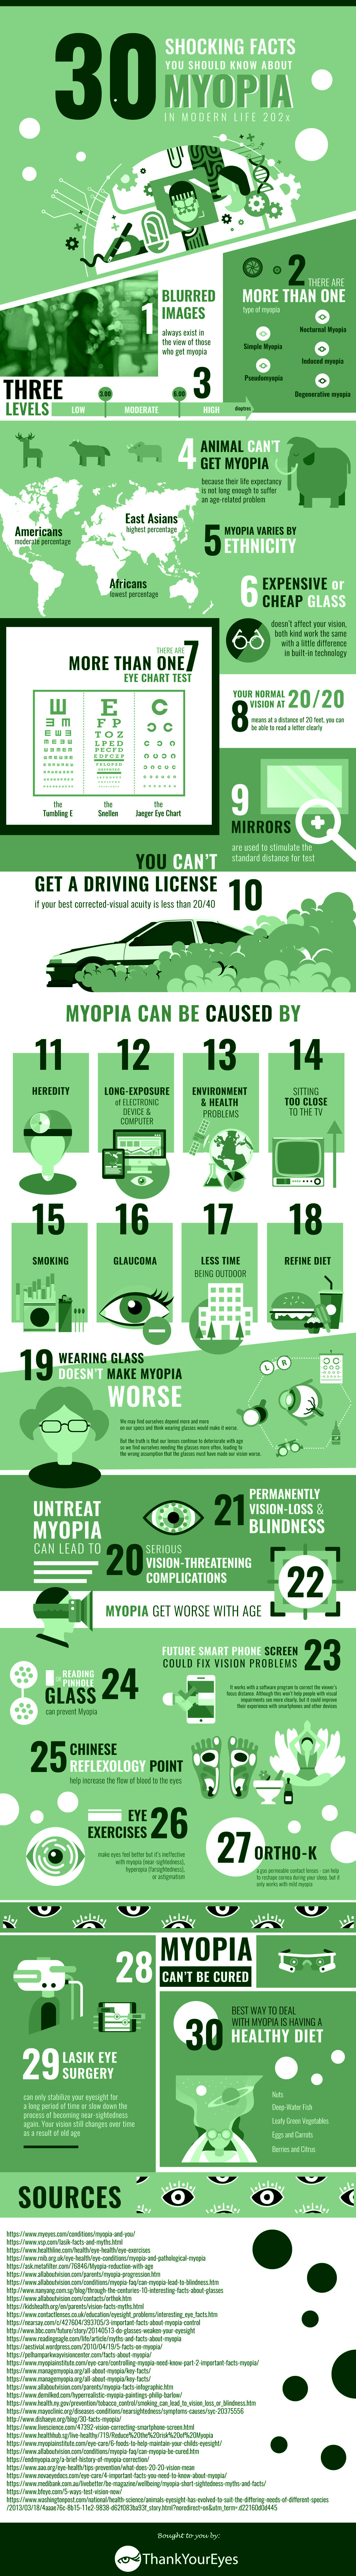 Facts-About-Myopia-Infographic